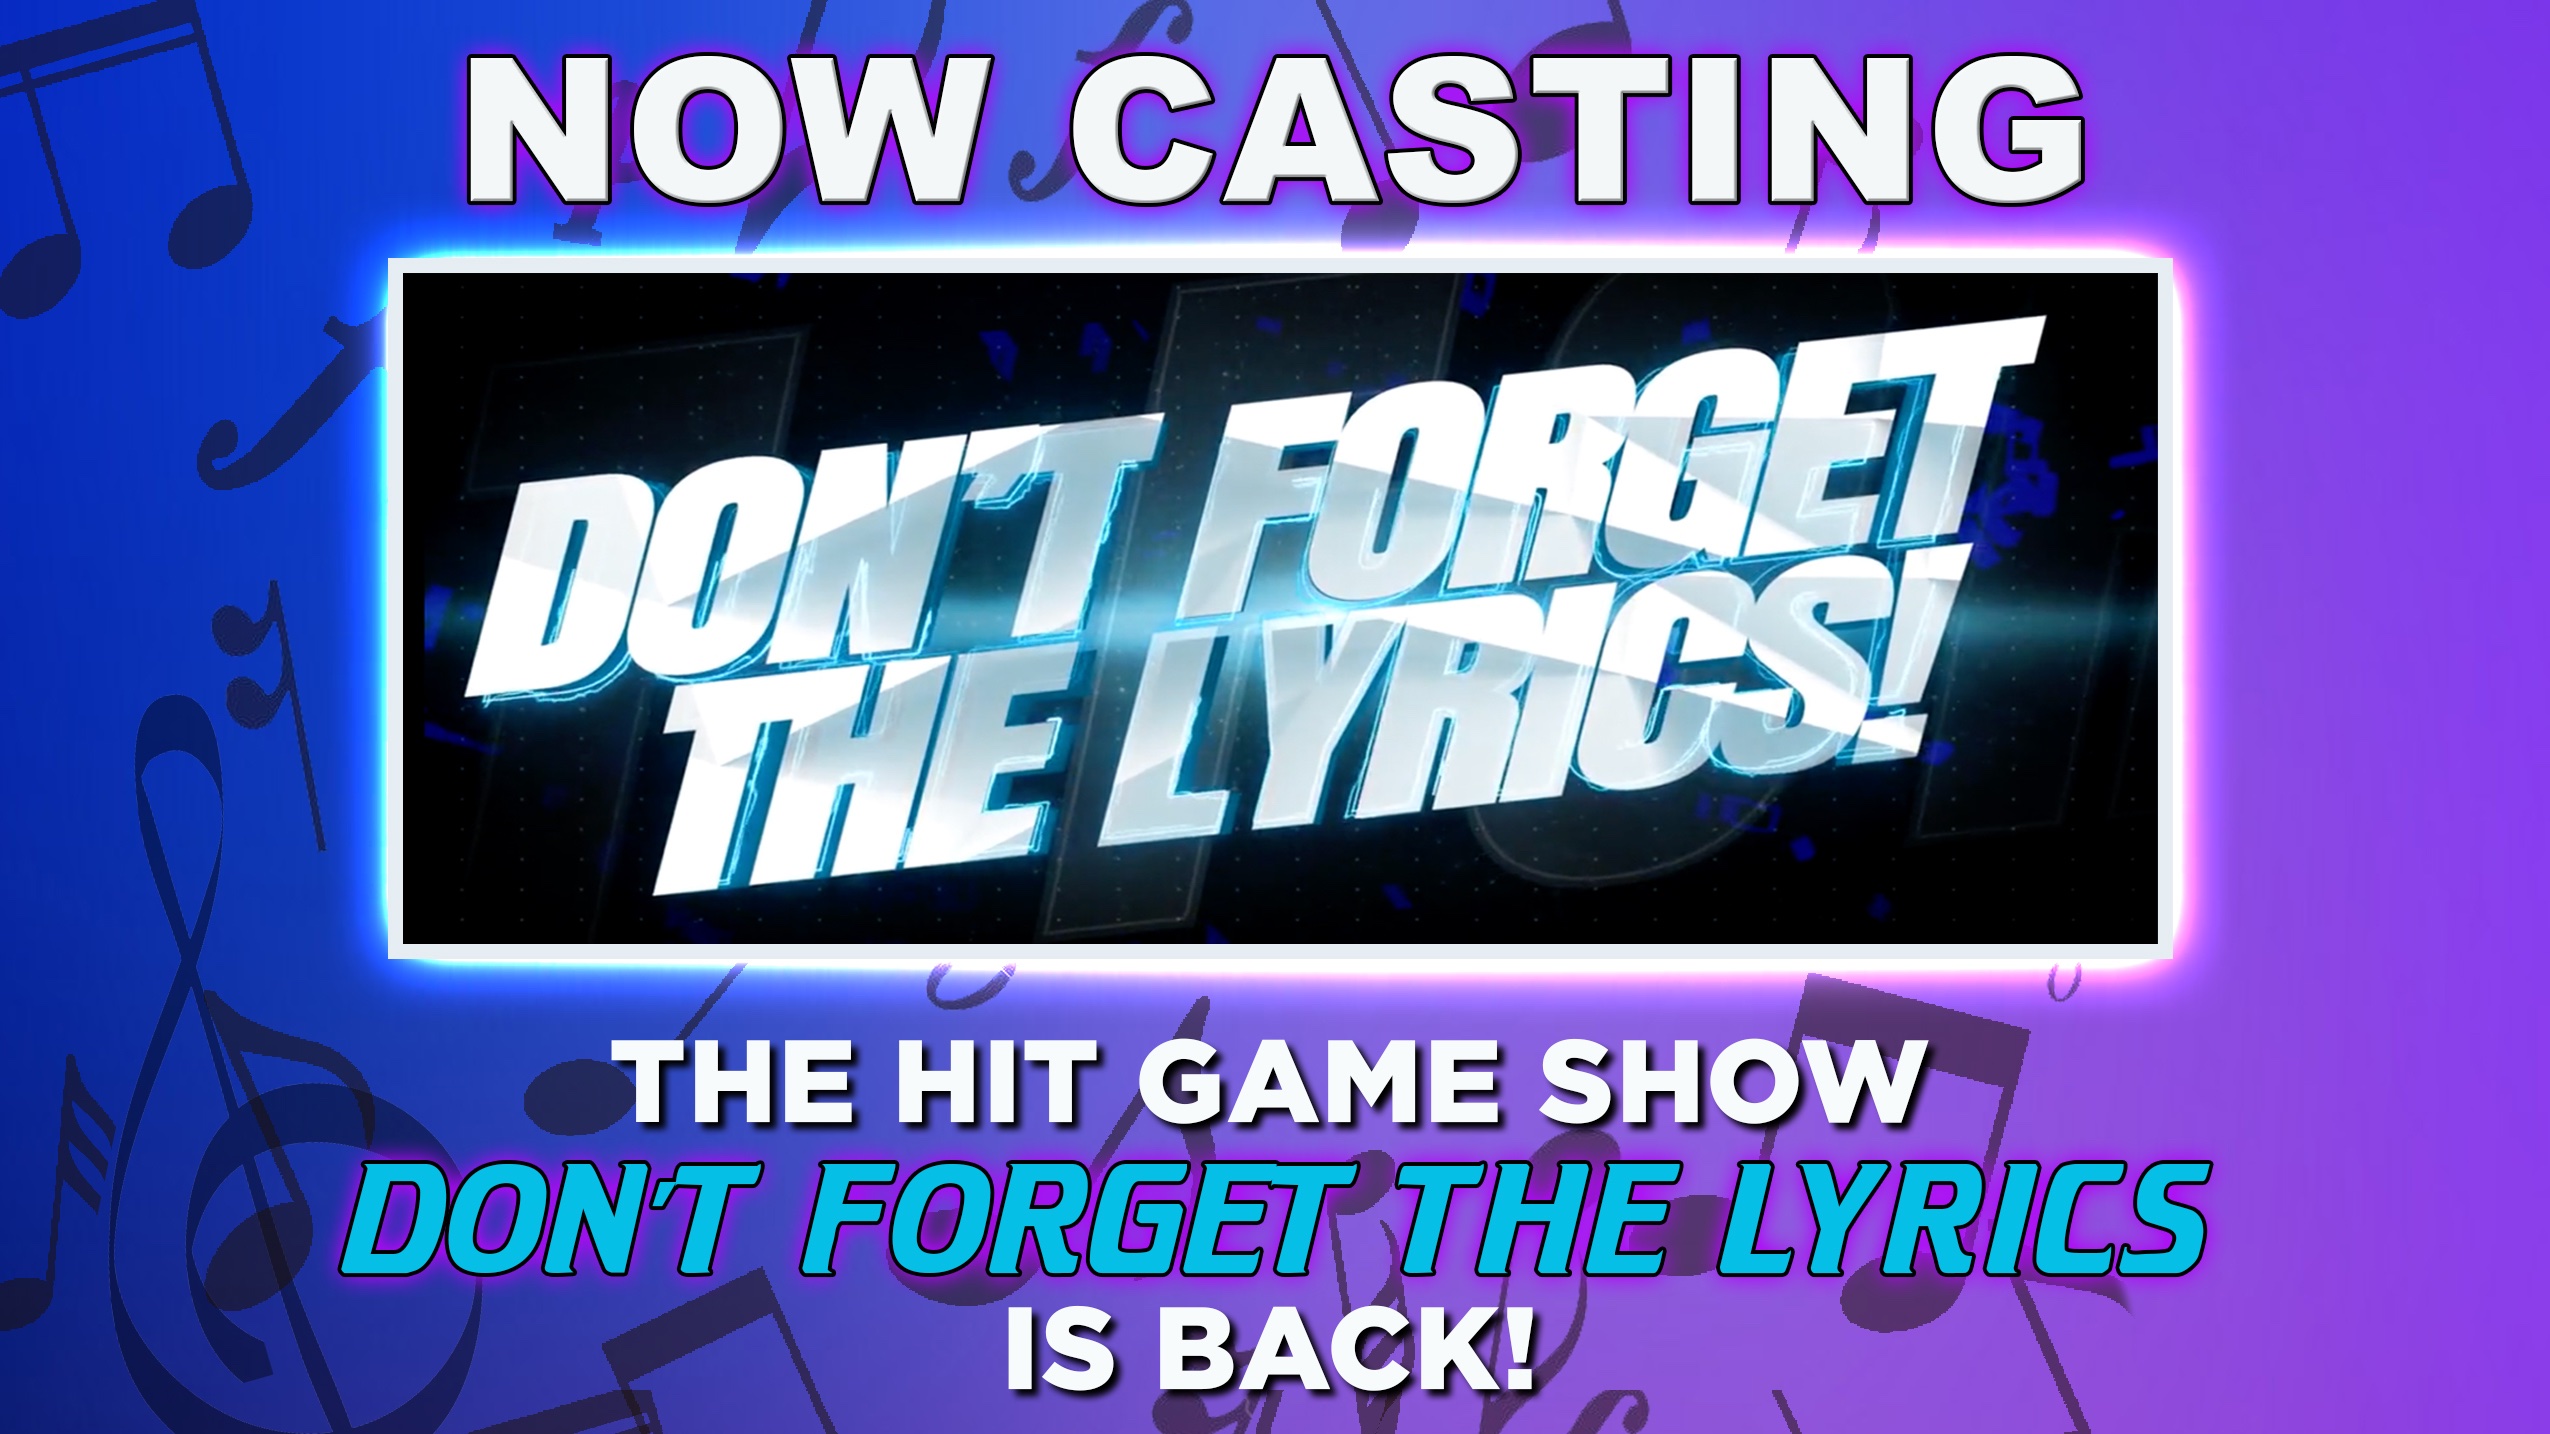 The hit game show DON'T FORGET THE - Game Show Casting